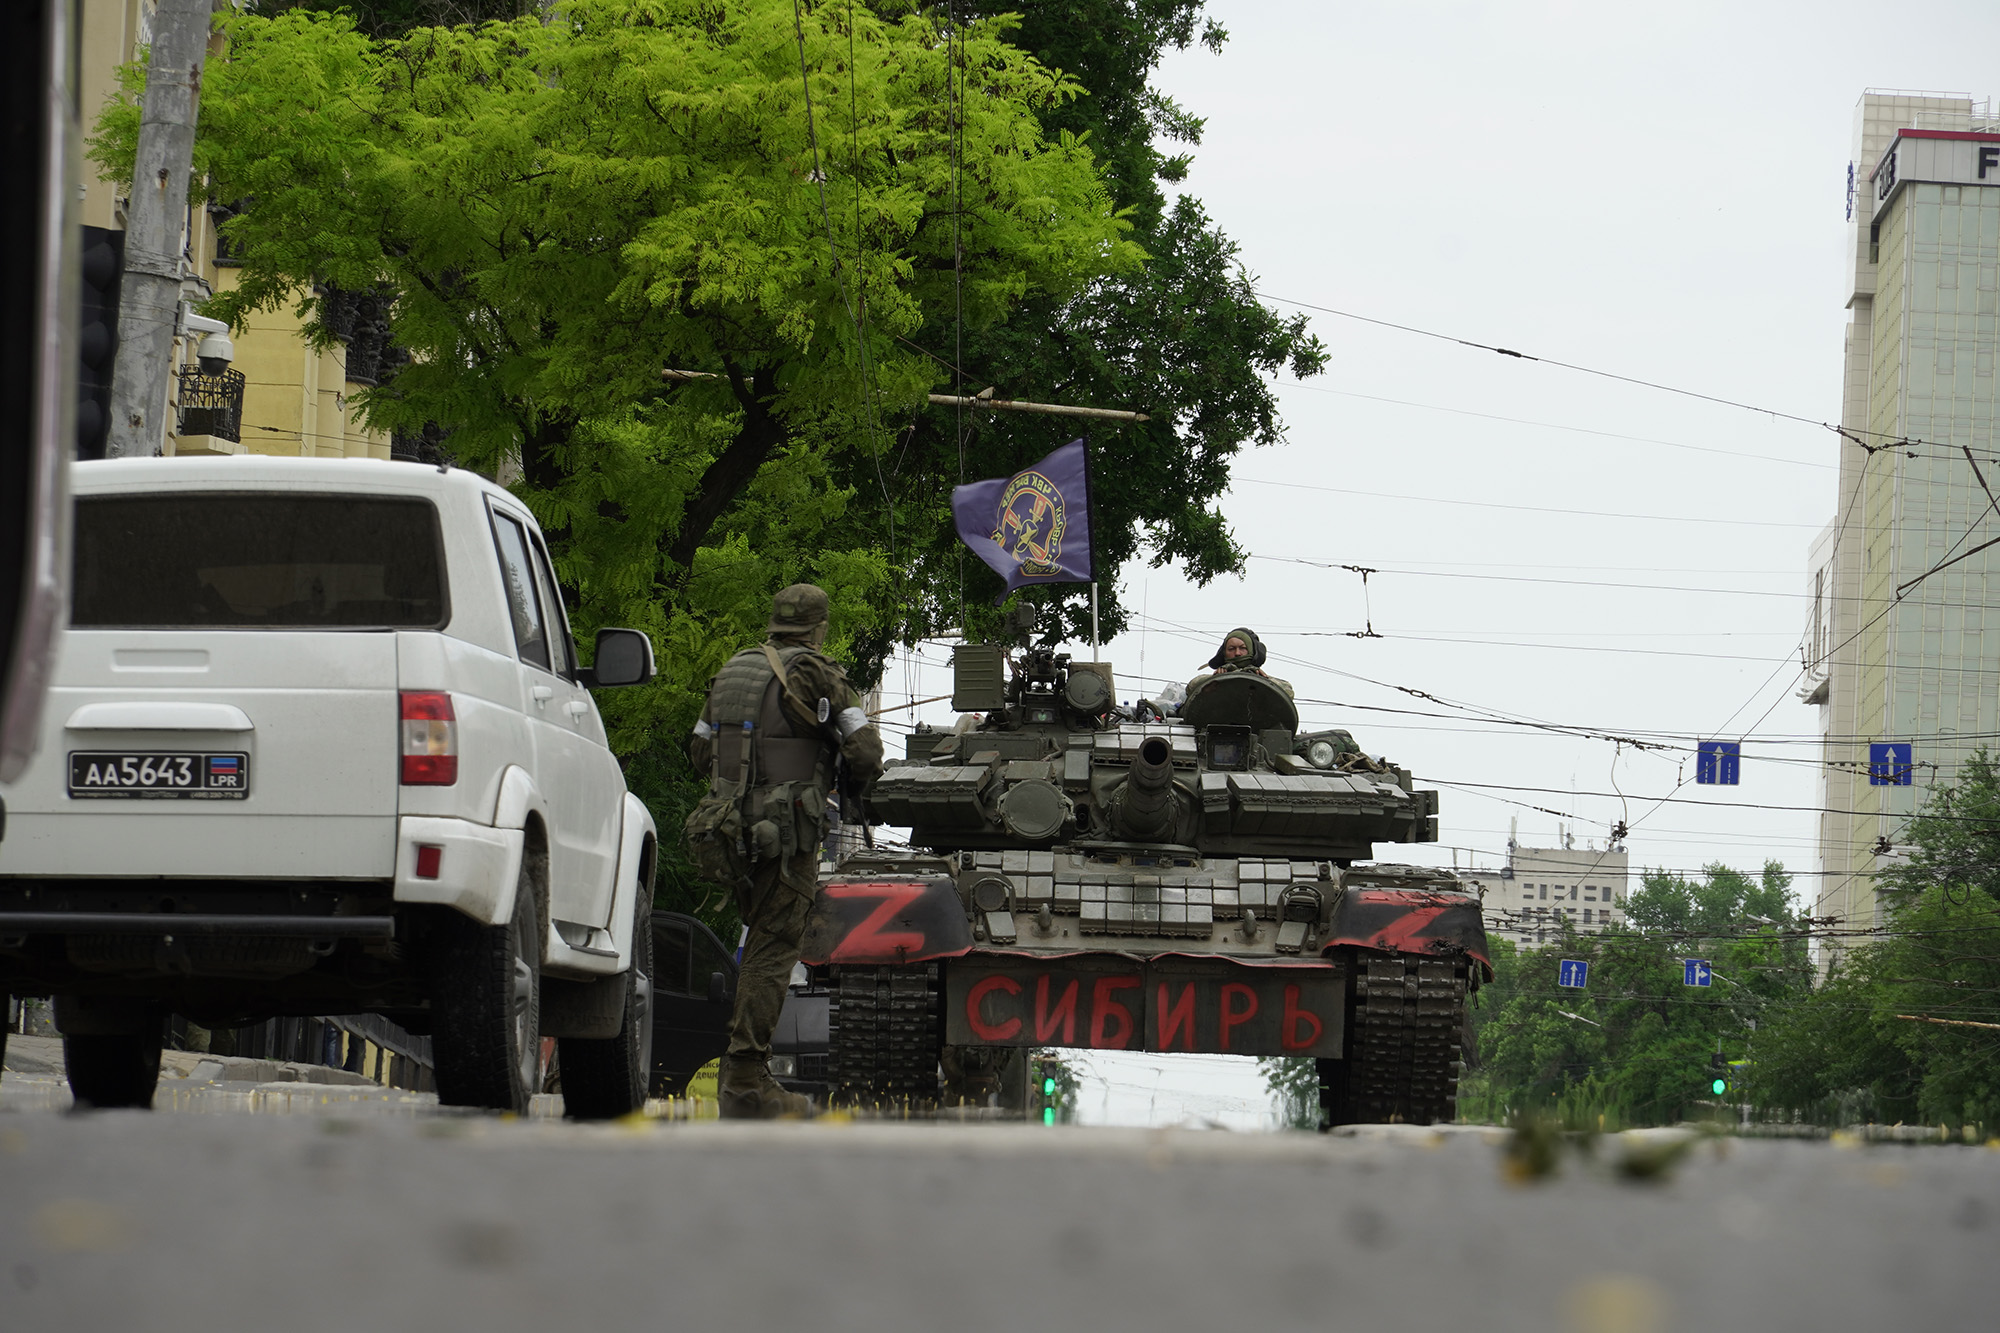 Armored vehicles and members of the Wagner group on the streets during tensions between the Kremlin and the Russian paramilitary group in Rostov-on-Don, Russia, on June 24